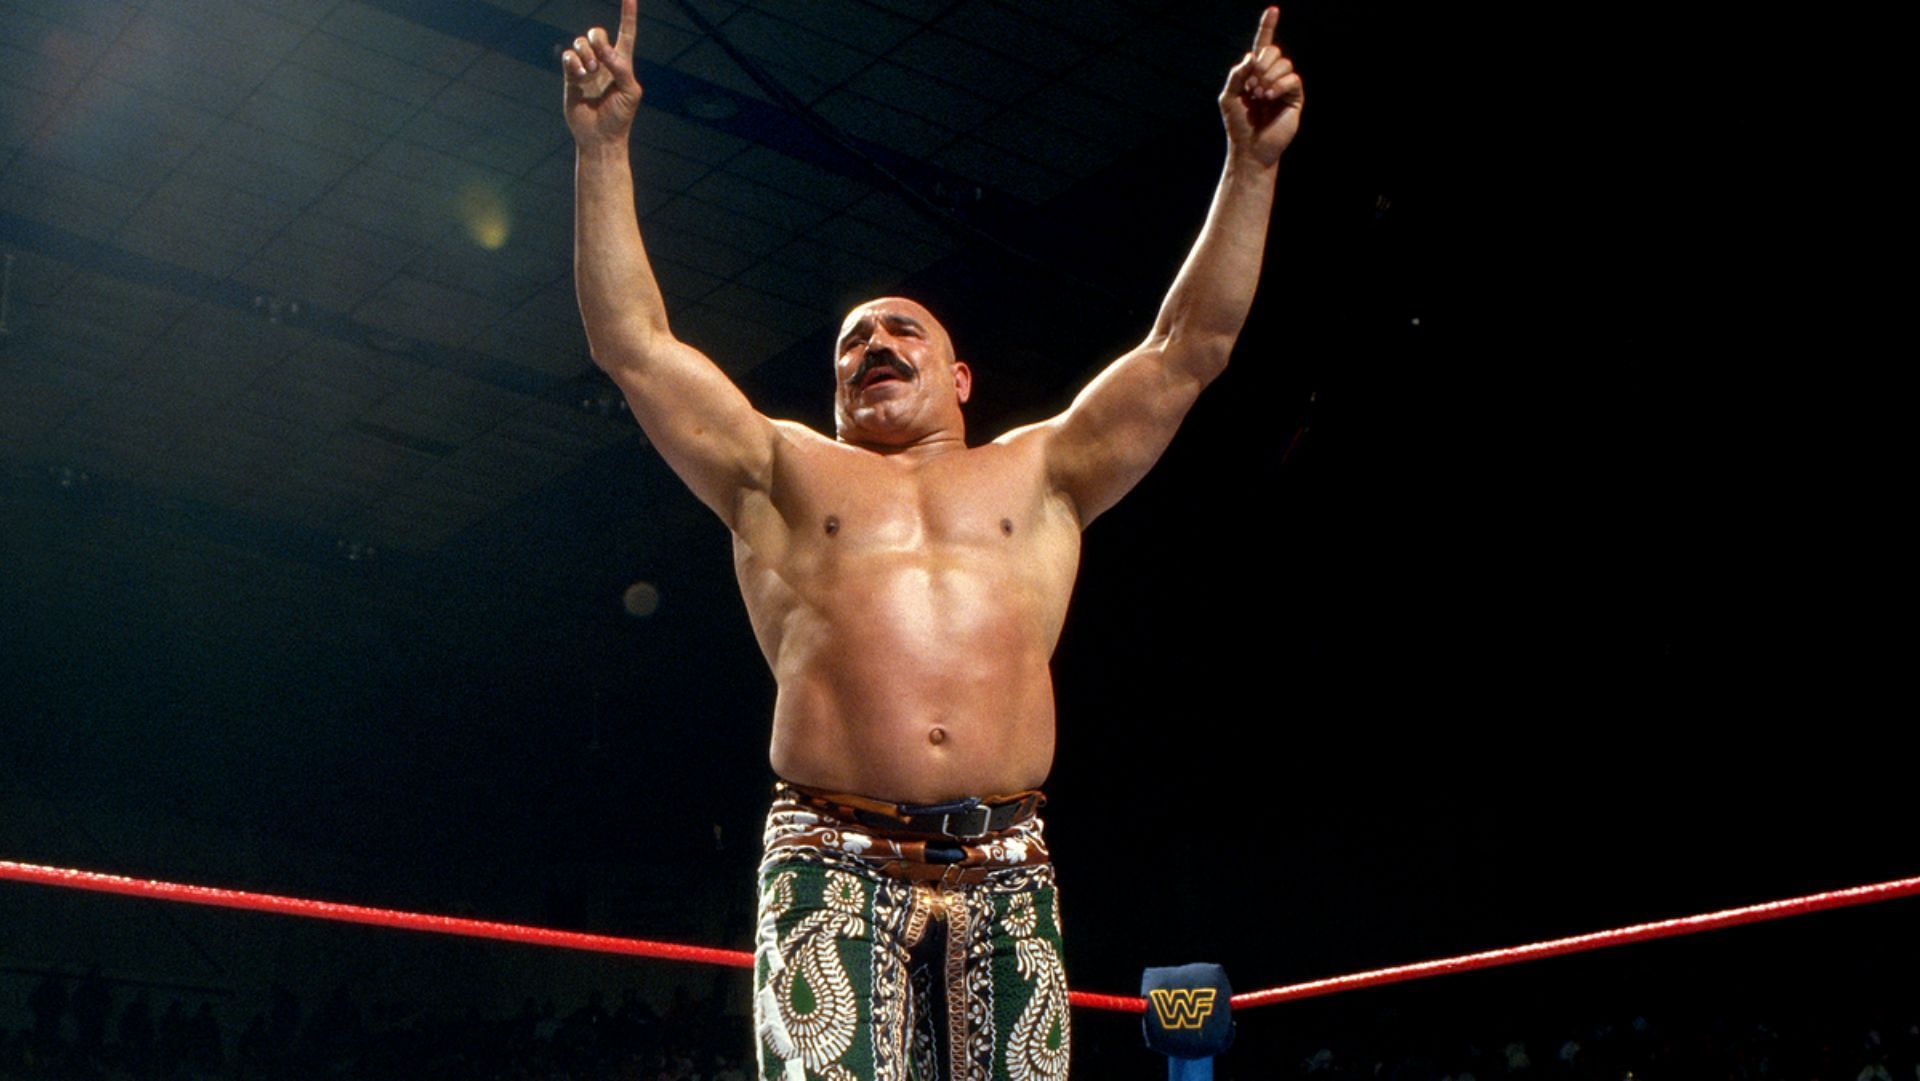 The Iron Sheik made his WWE debut in 1979.